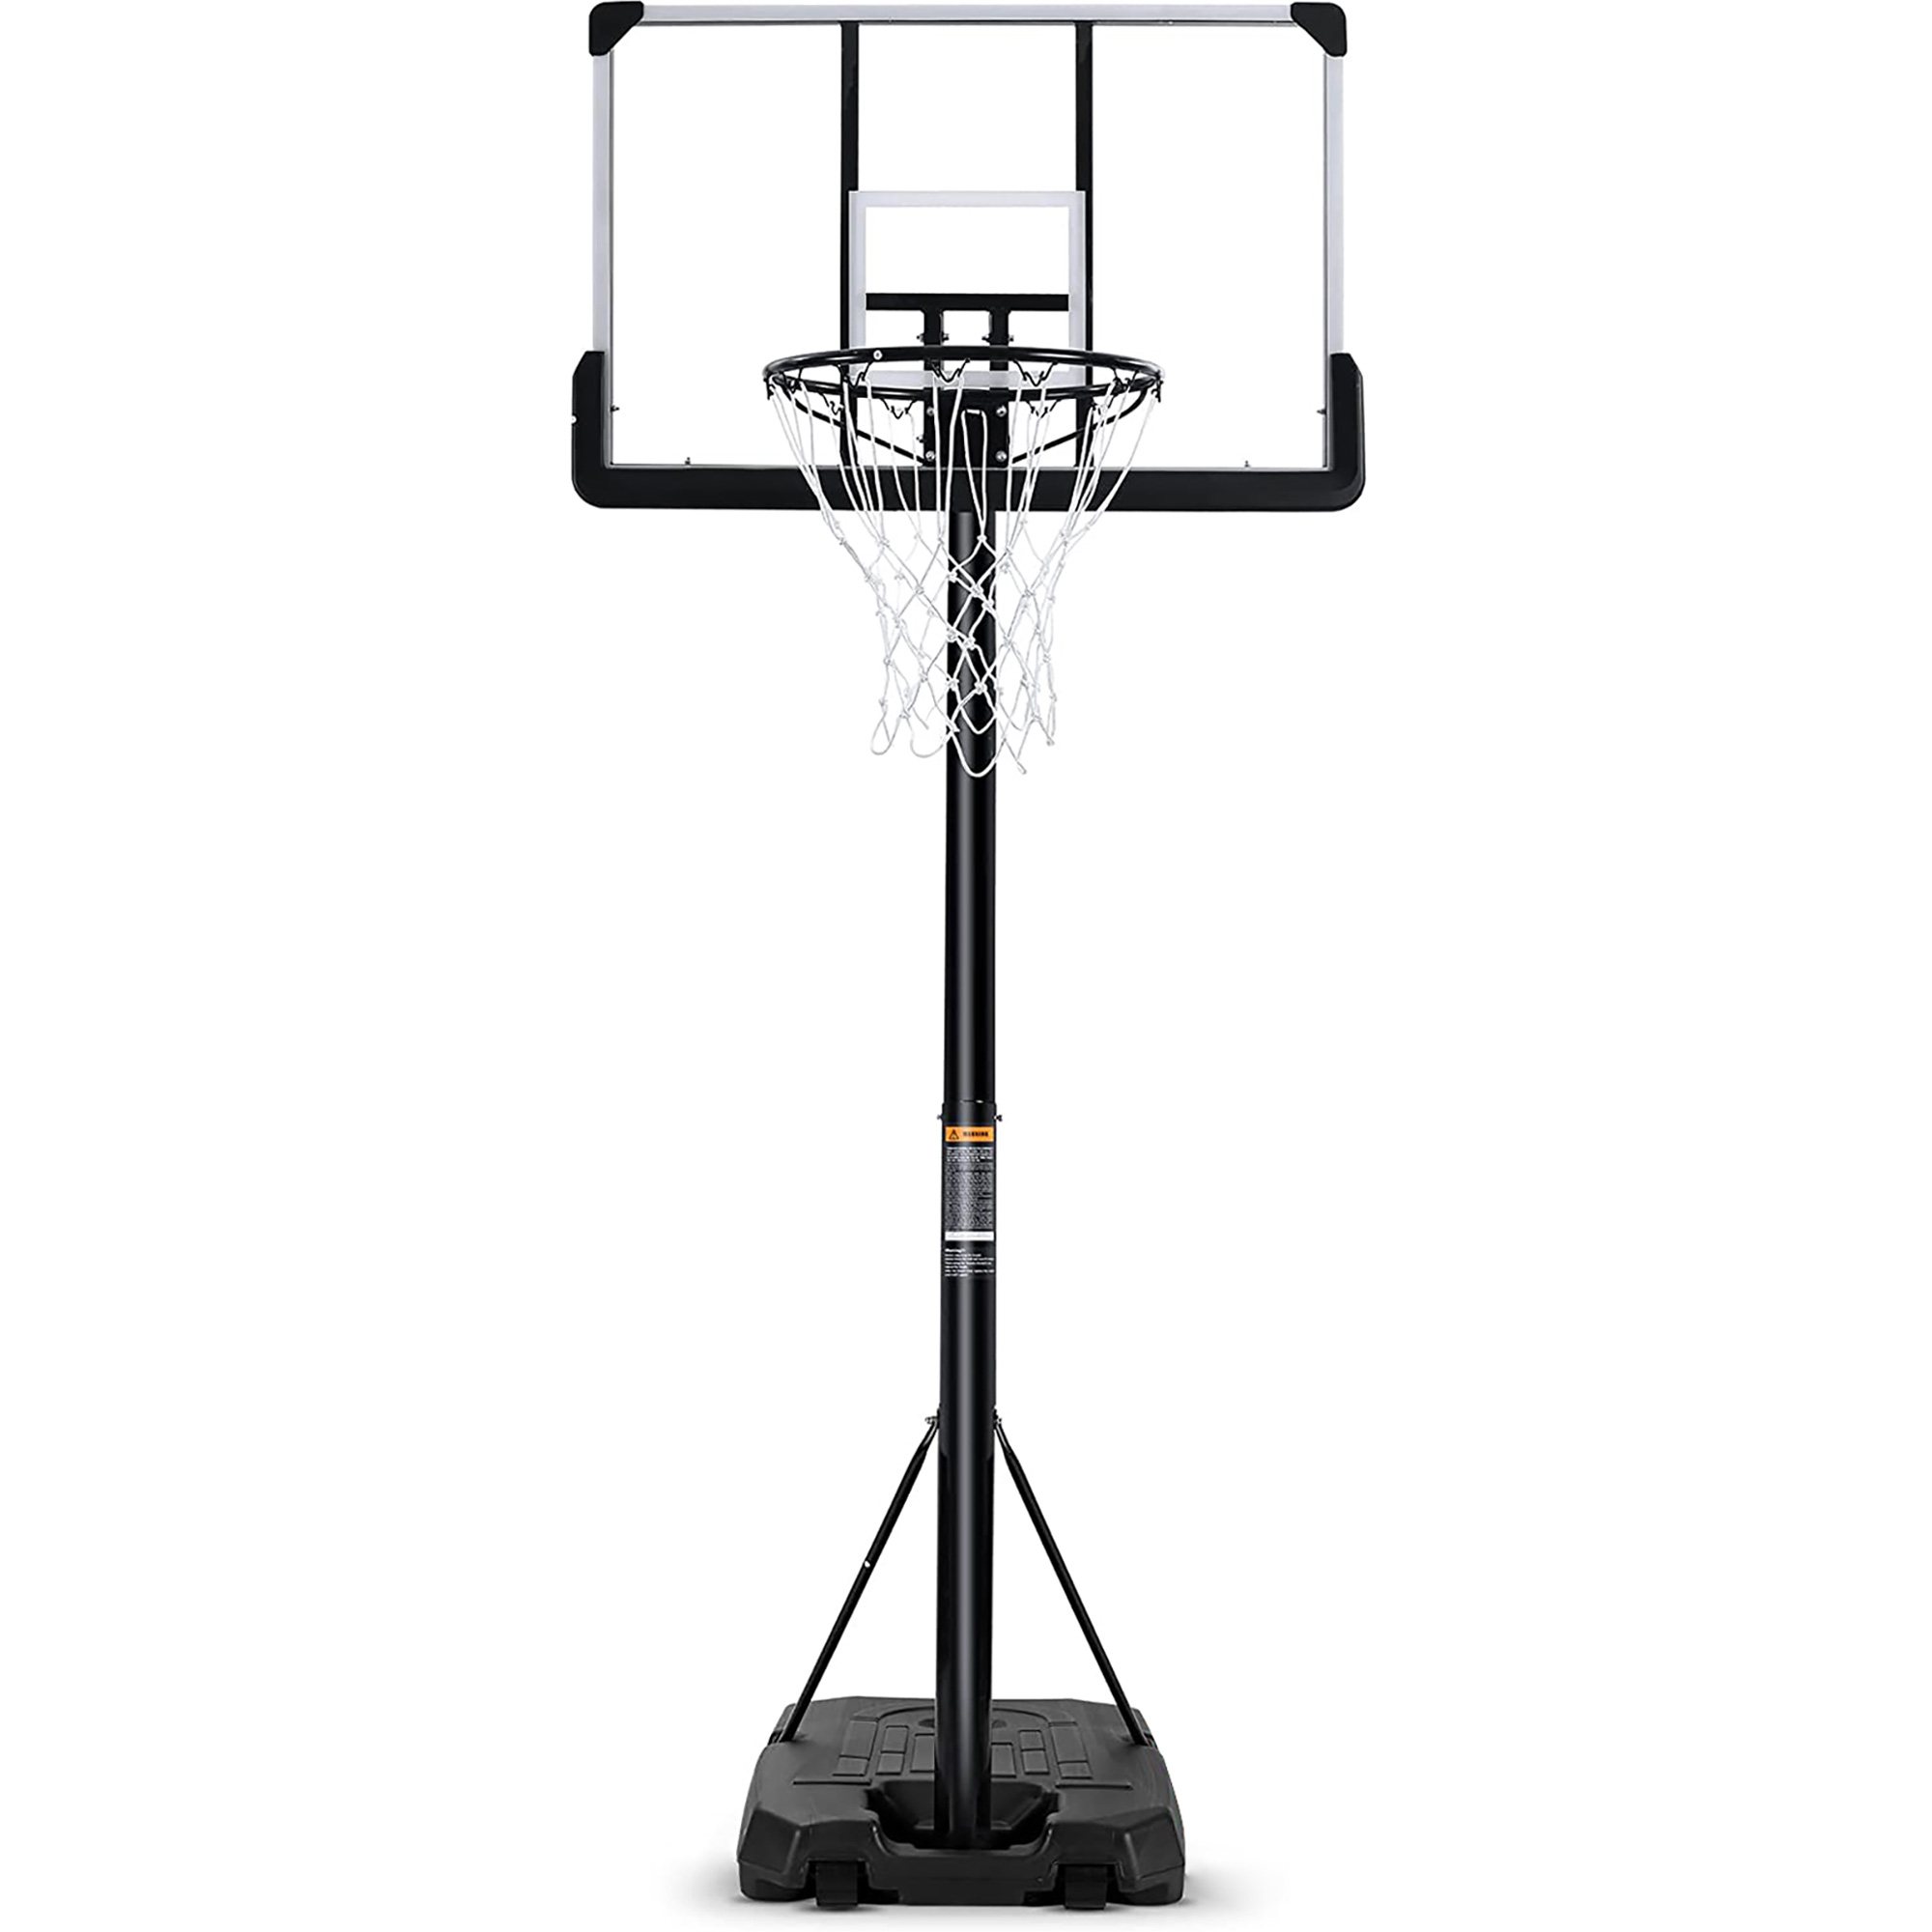 Portable Basketball Hoop Goal Basketball Hoop System Height Adjustable 7 ft. 6 in. - 10 ft. with 44 inch Indoor Outdoor PVC Backboard Material - image 1 of 11